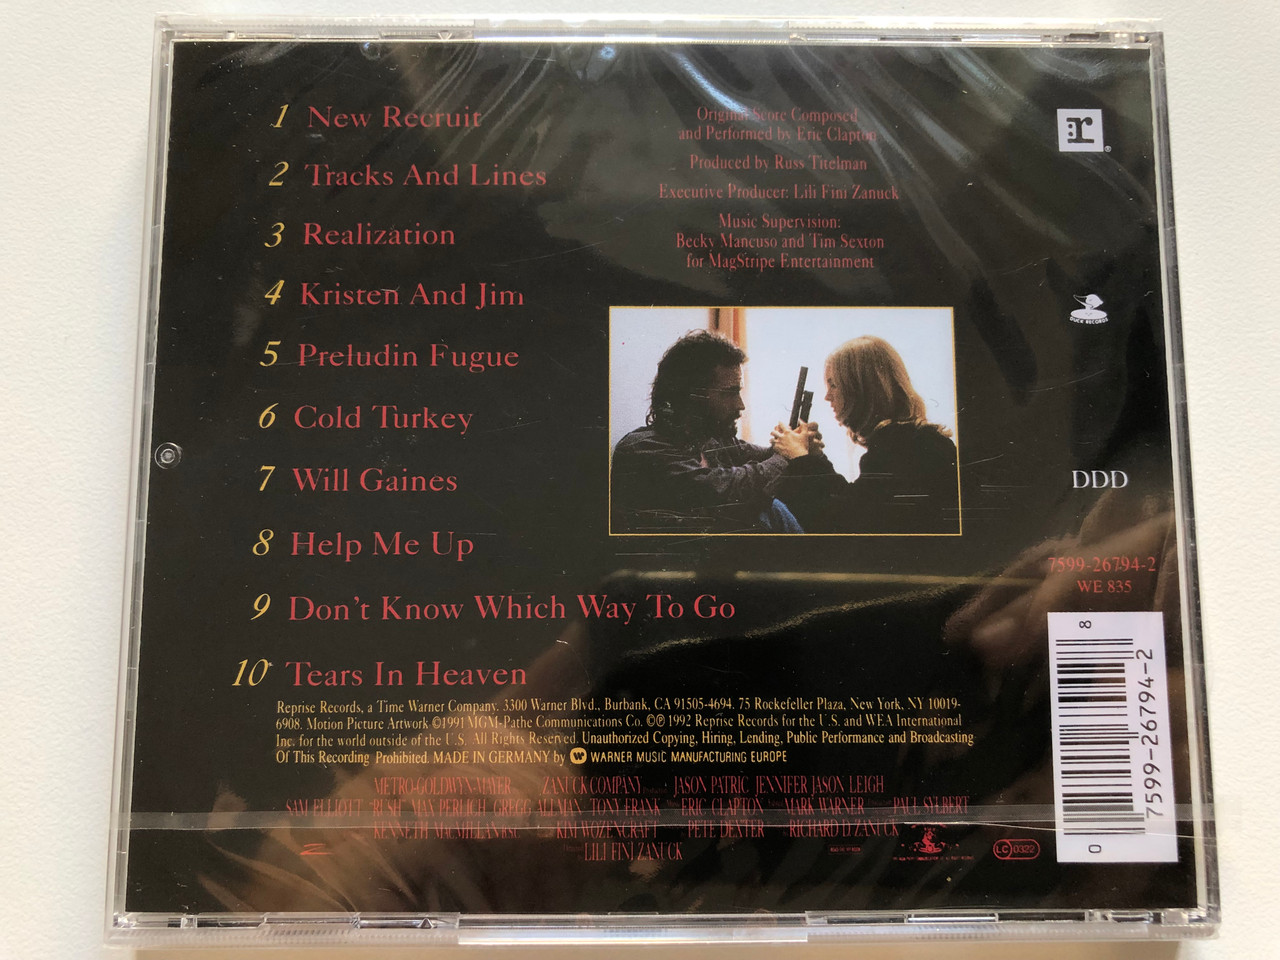 https://cdn10.bigcommerce.com/s-62bdpkt7pb/products/0/images/212975/Rush_Music_From_The_Motion_Picture_Soundtrack_-_Original_Score_Composed_and_Performed_by_Eric_Clapton_Reprise_Records_Audio_CD_1992_7599-26794-2_2__28806.1644818004.1280.1280.JPG?c=2&_gl=1*1yyagea*_ga*MjA2NTIxMjE2MC4xNTkwNTEyNTMy*_ga_WS2VZYPC6G*MTY0NDgxNTg1OC4yODUuMS4xNjQ0ODE3Nzk2LjU4